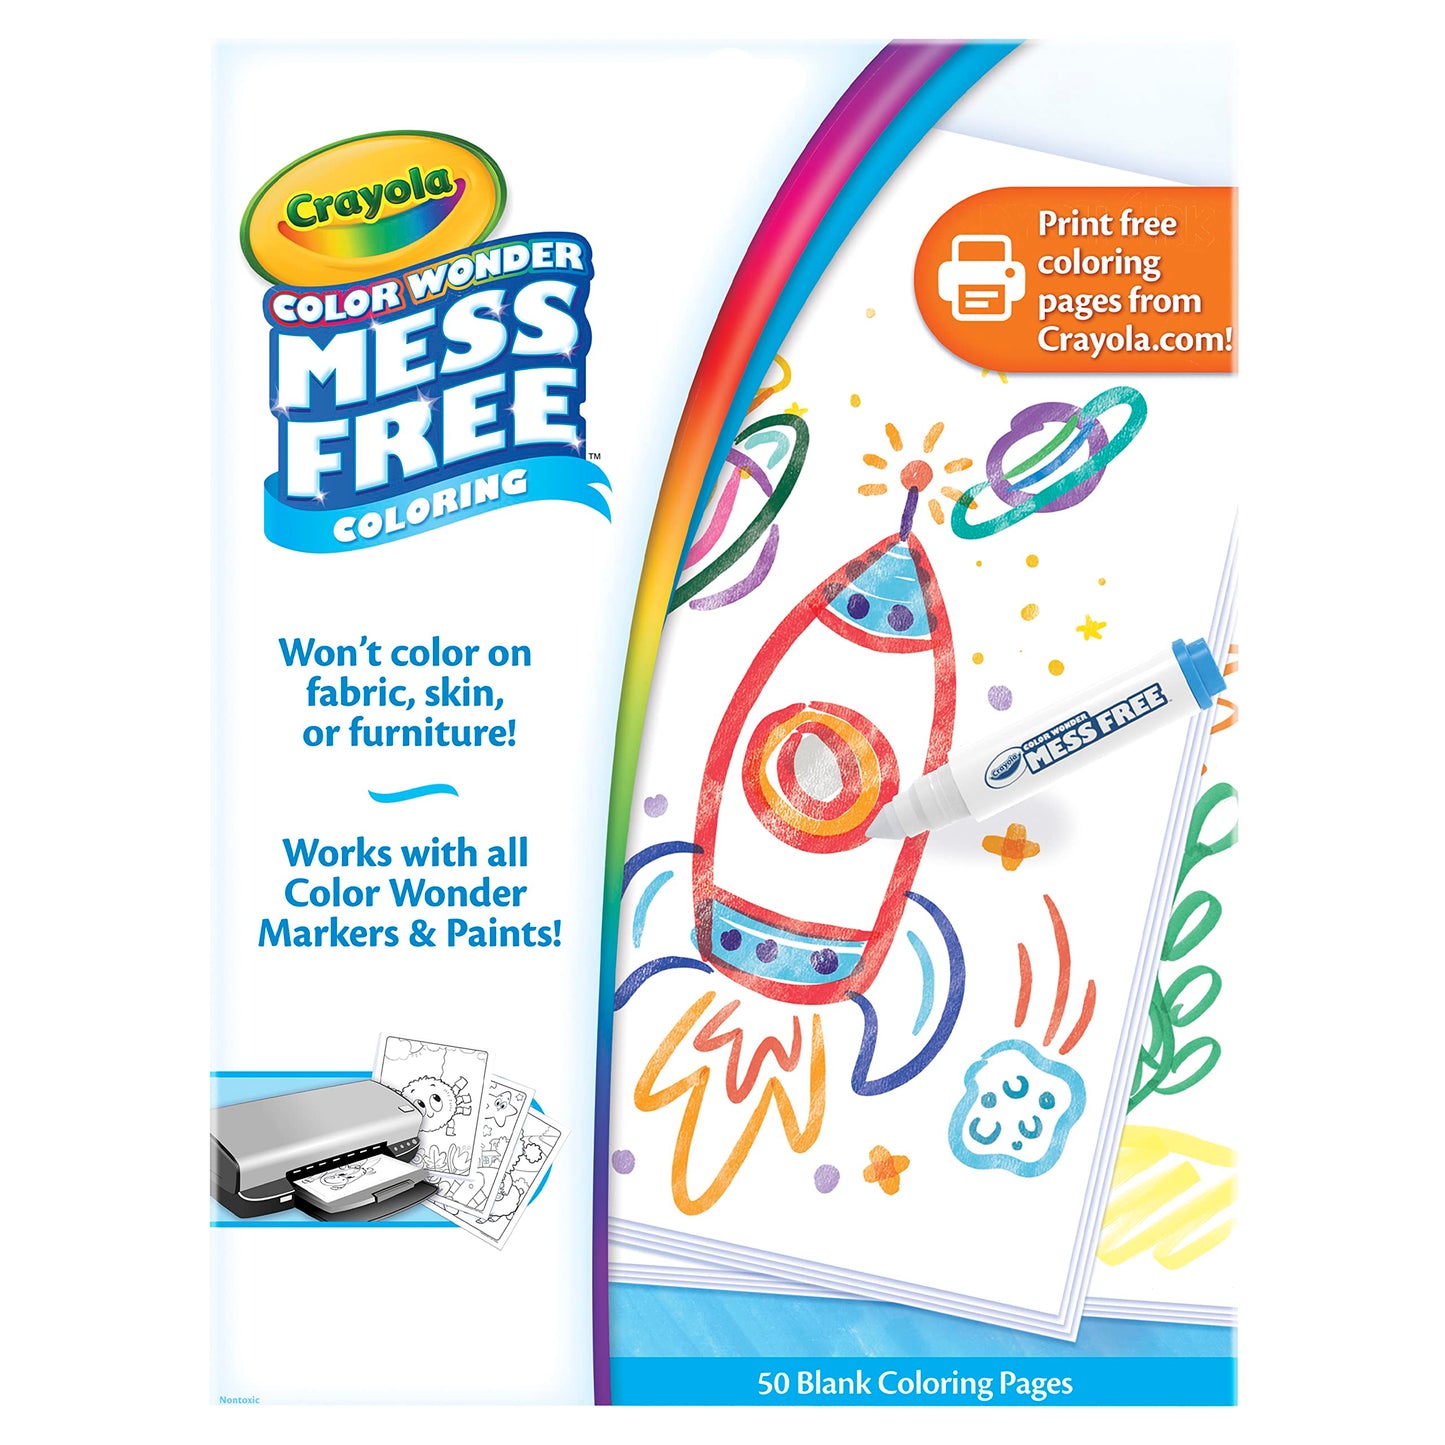 Crayola Bluey Color Wonder, 18 Bluey Coloring Pages, Mess Free Coloring for Toddlers, Easter Basket Stuffer, Bluey Toys & Gifts